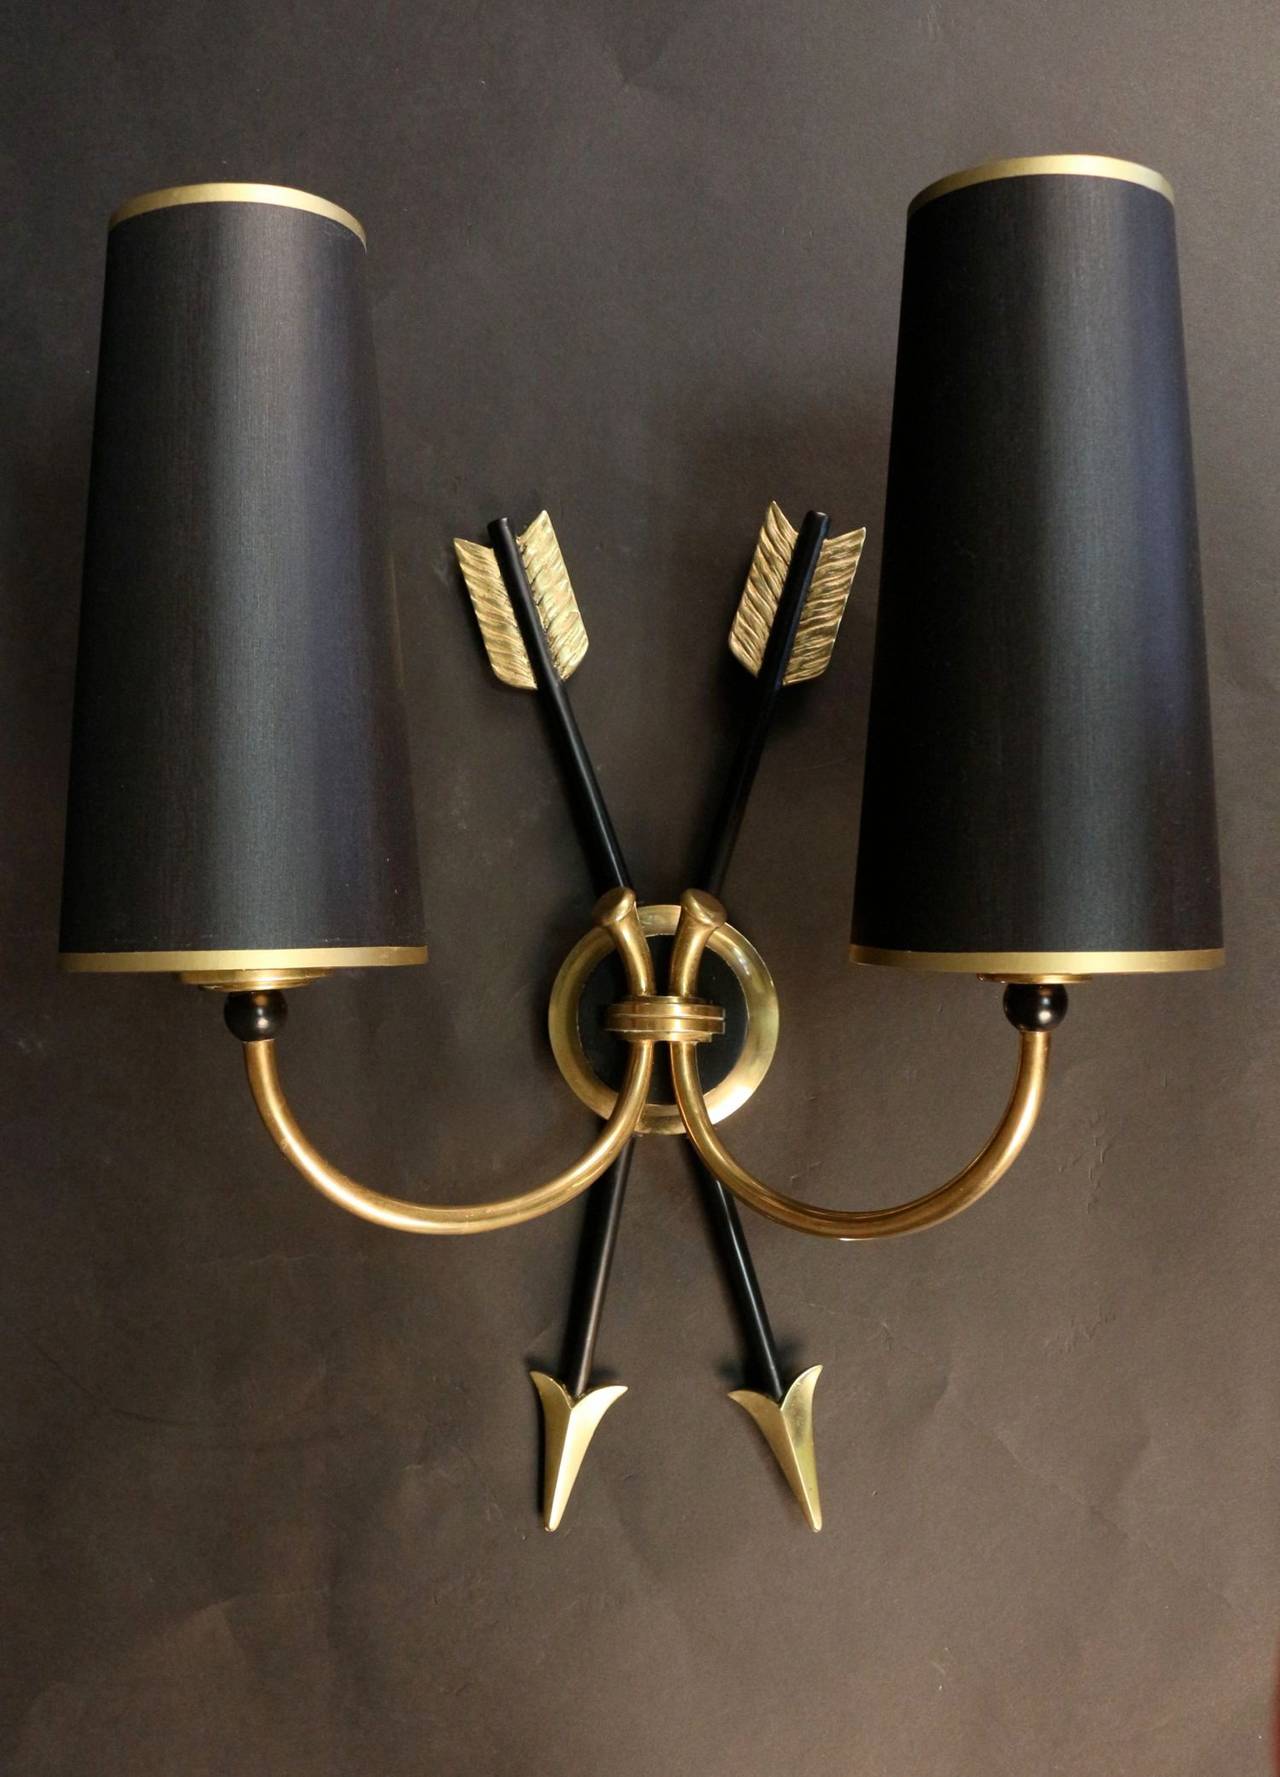 Pair of 1950's 'Arrow' sconces by Maison Arlus in gold and blackened brass. Two crossed arrows on the center-based medallion. Two light arms per sconce, custom redone lampshades, black exterior, gold interior.